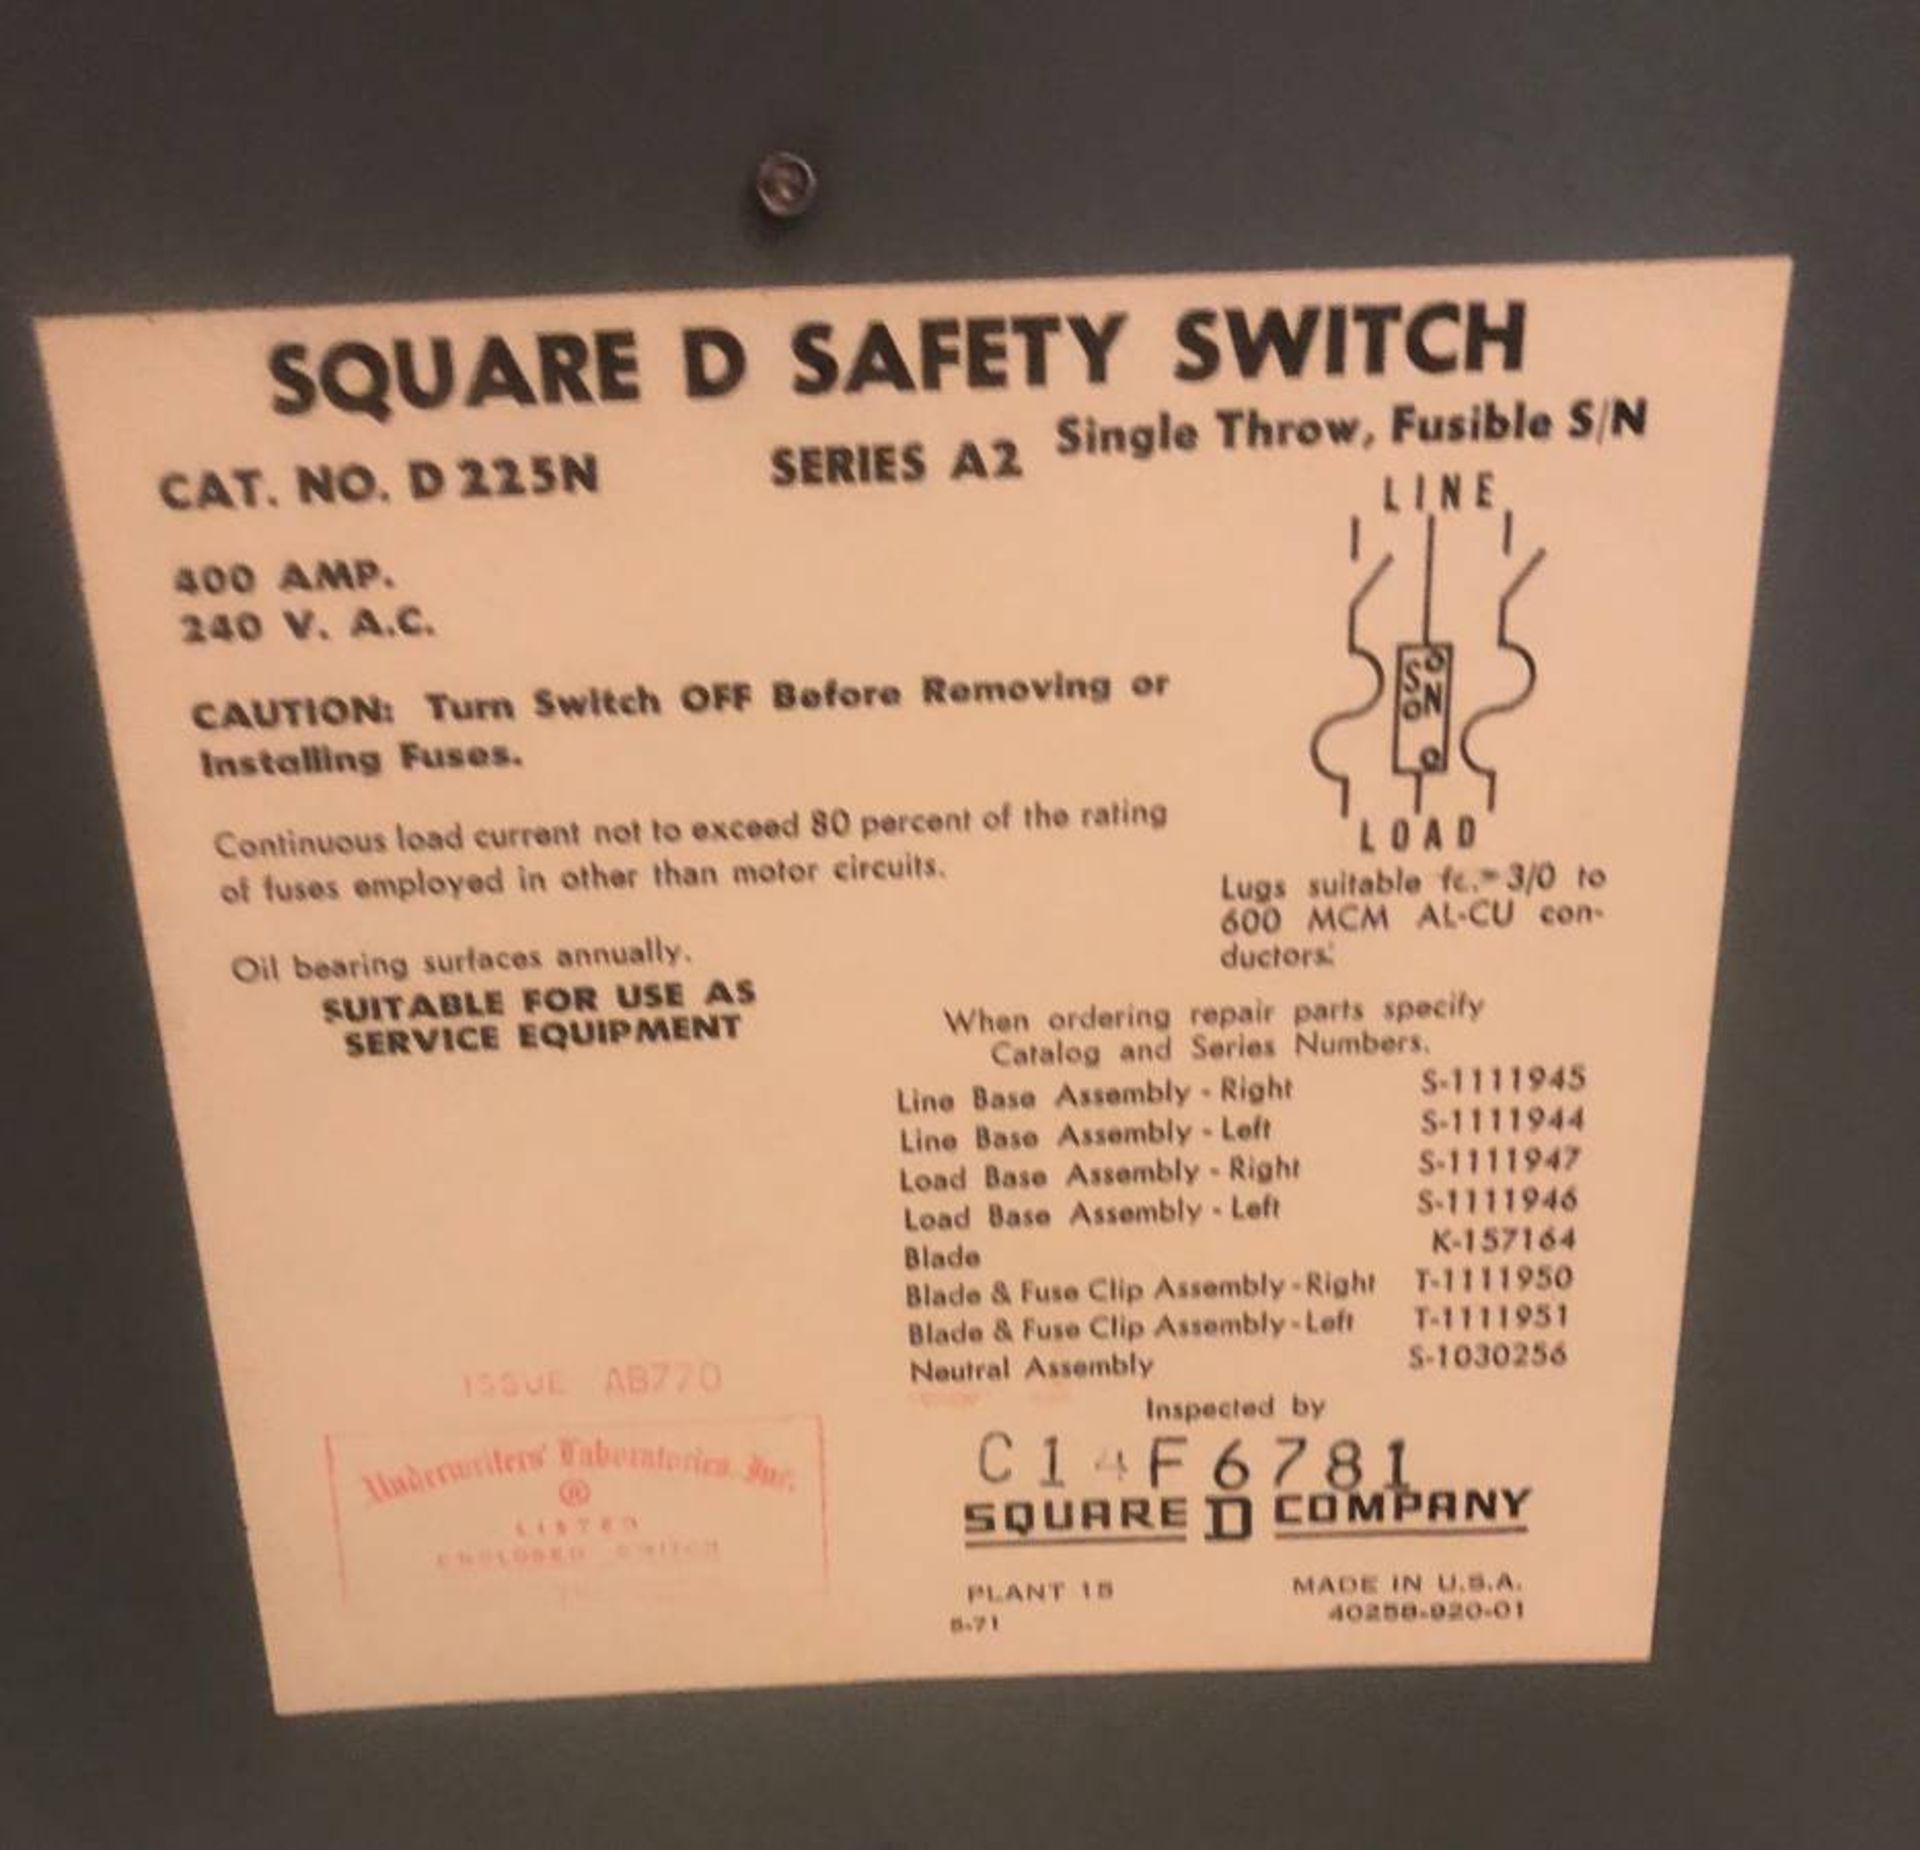 Square D D225N GD Safety Switch 400A 240V FUSIBLE $1500 new - Bild 2 aus 5